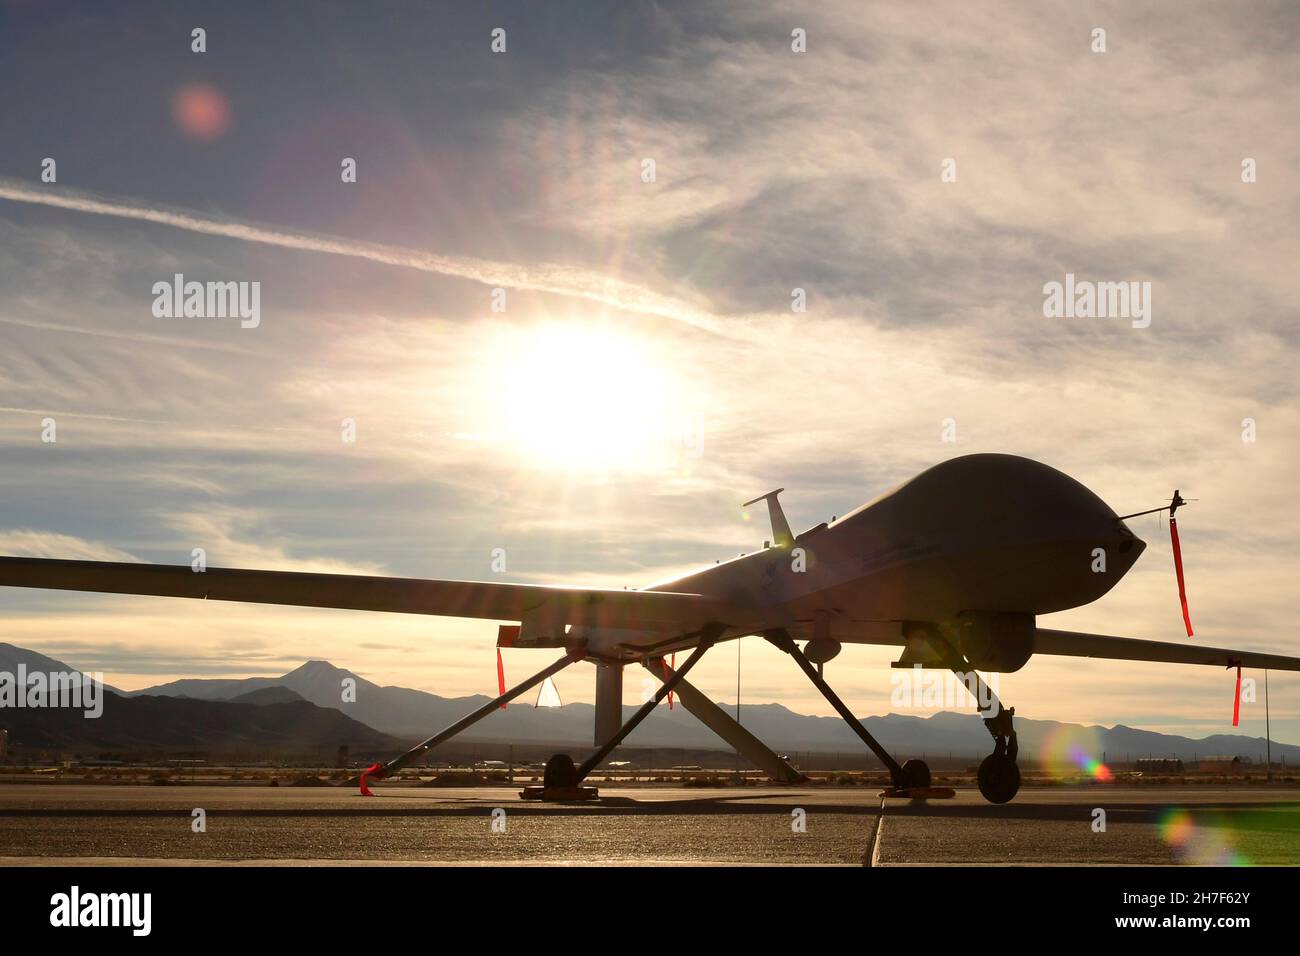 Indian Springs, United States of America. 08 December, 2016. A U.S. Air Force MQ-1 Predator unmanned aerial vehicle is silhouetted by the setting sun on the ground at Creech Air Force Base, December 8, 2016 near Las Vegas, Nevada.  Credit: SrA Christian Clausen/US Air Force Photo/Alamy Live News Stock Photo